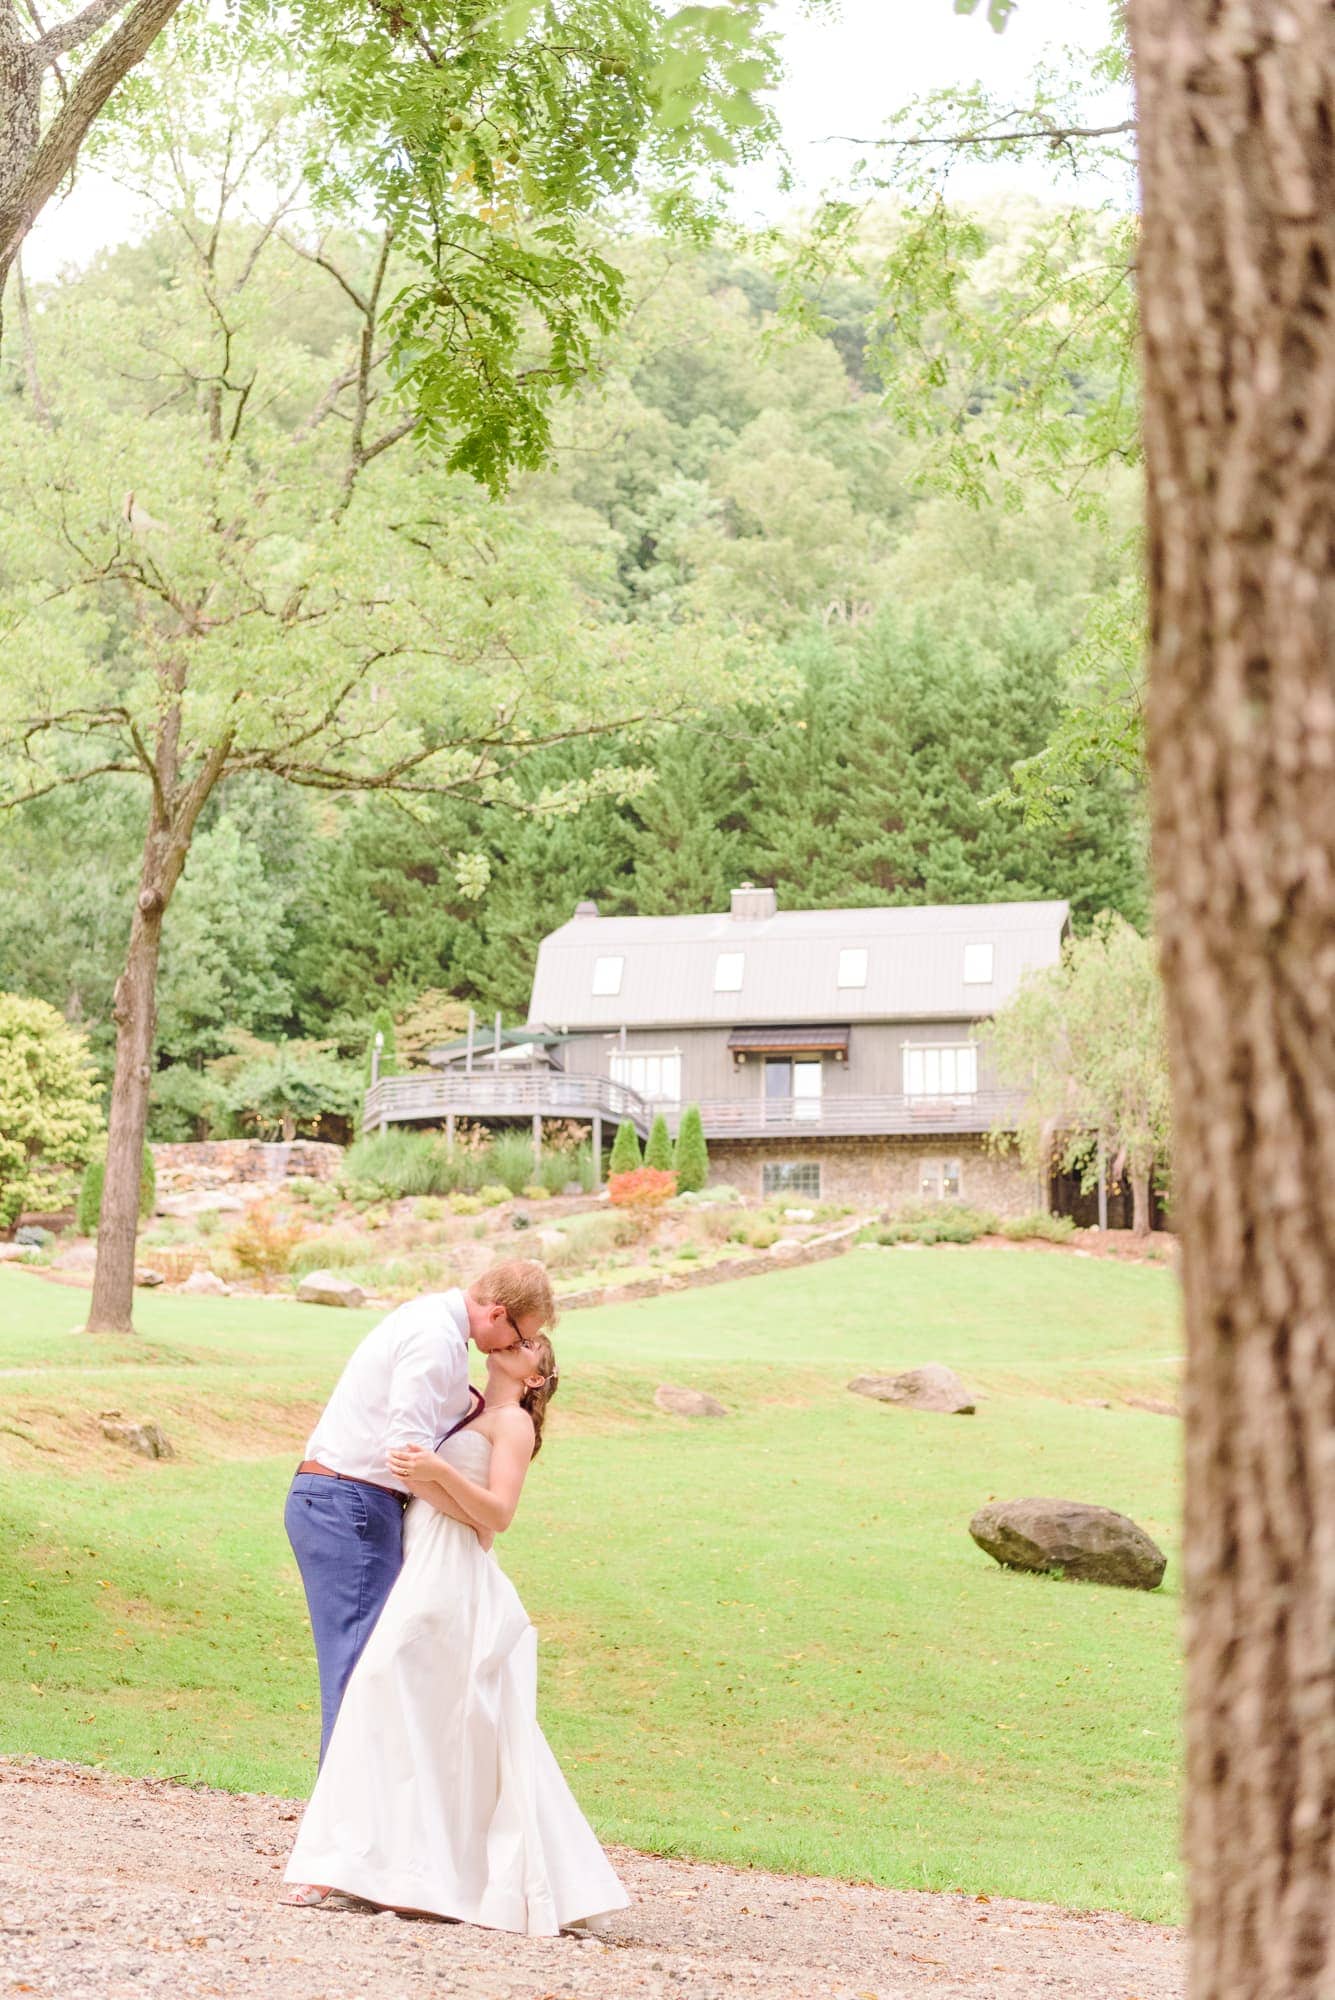 Erin and Will kiss in front of the Delaney Ridge property.